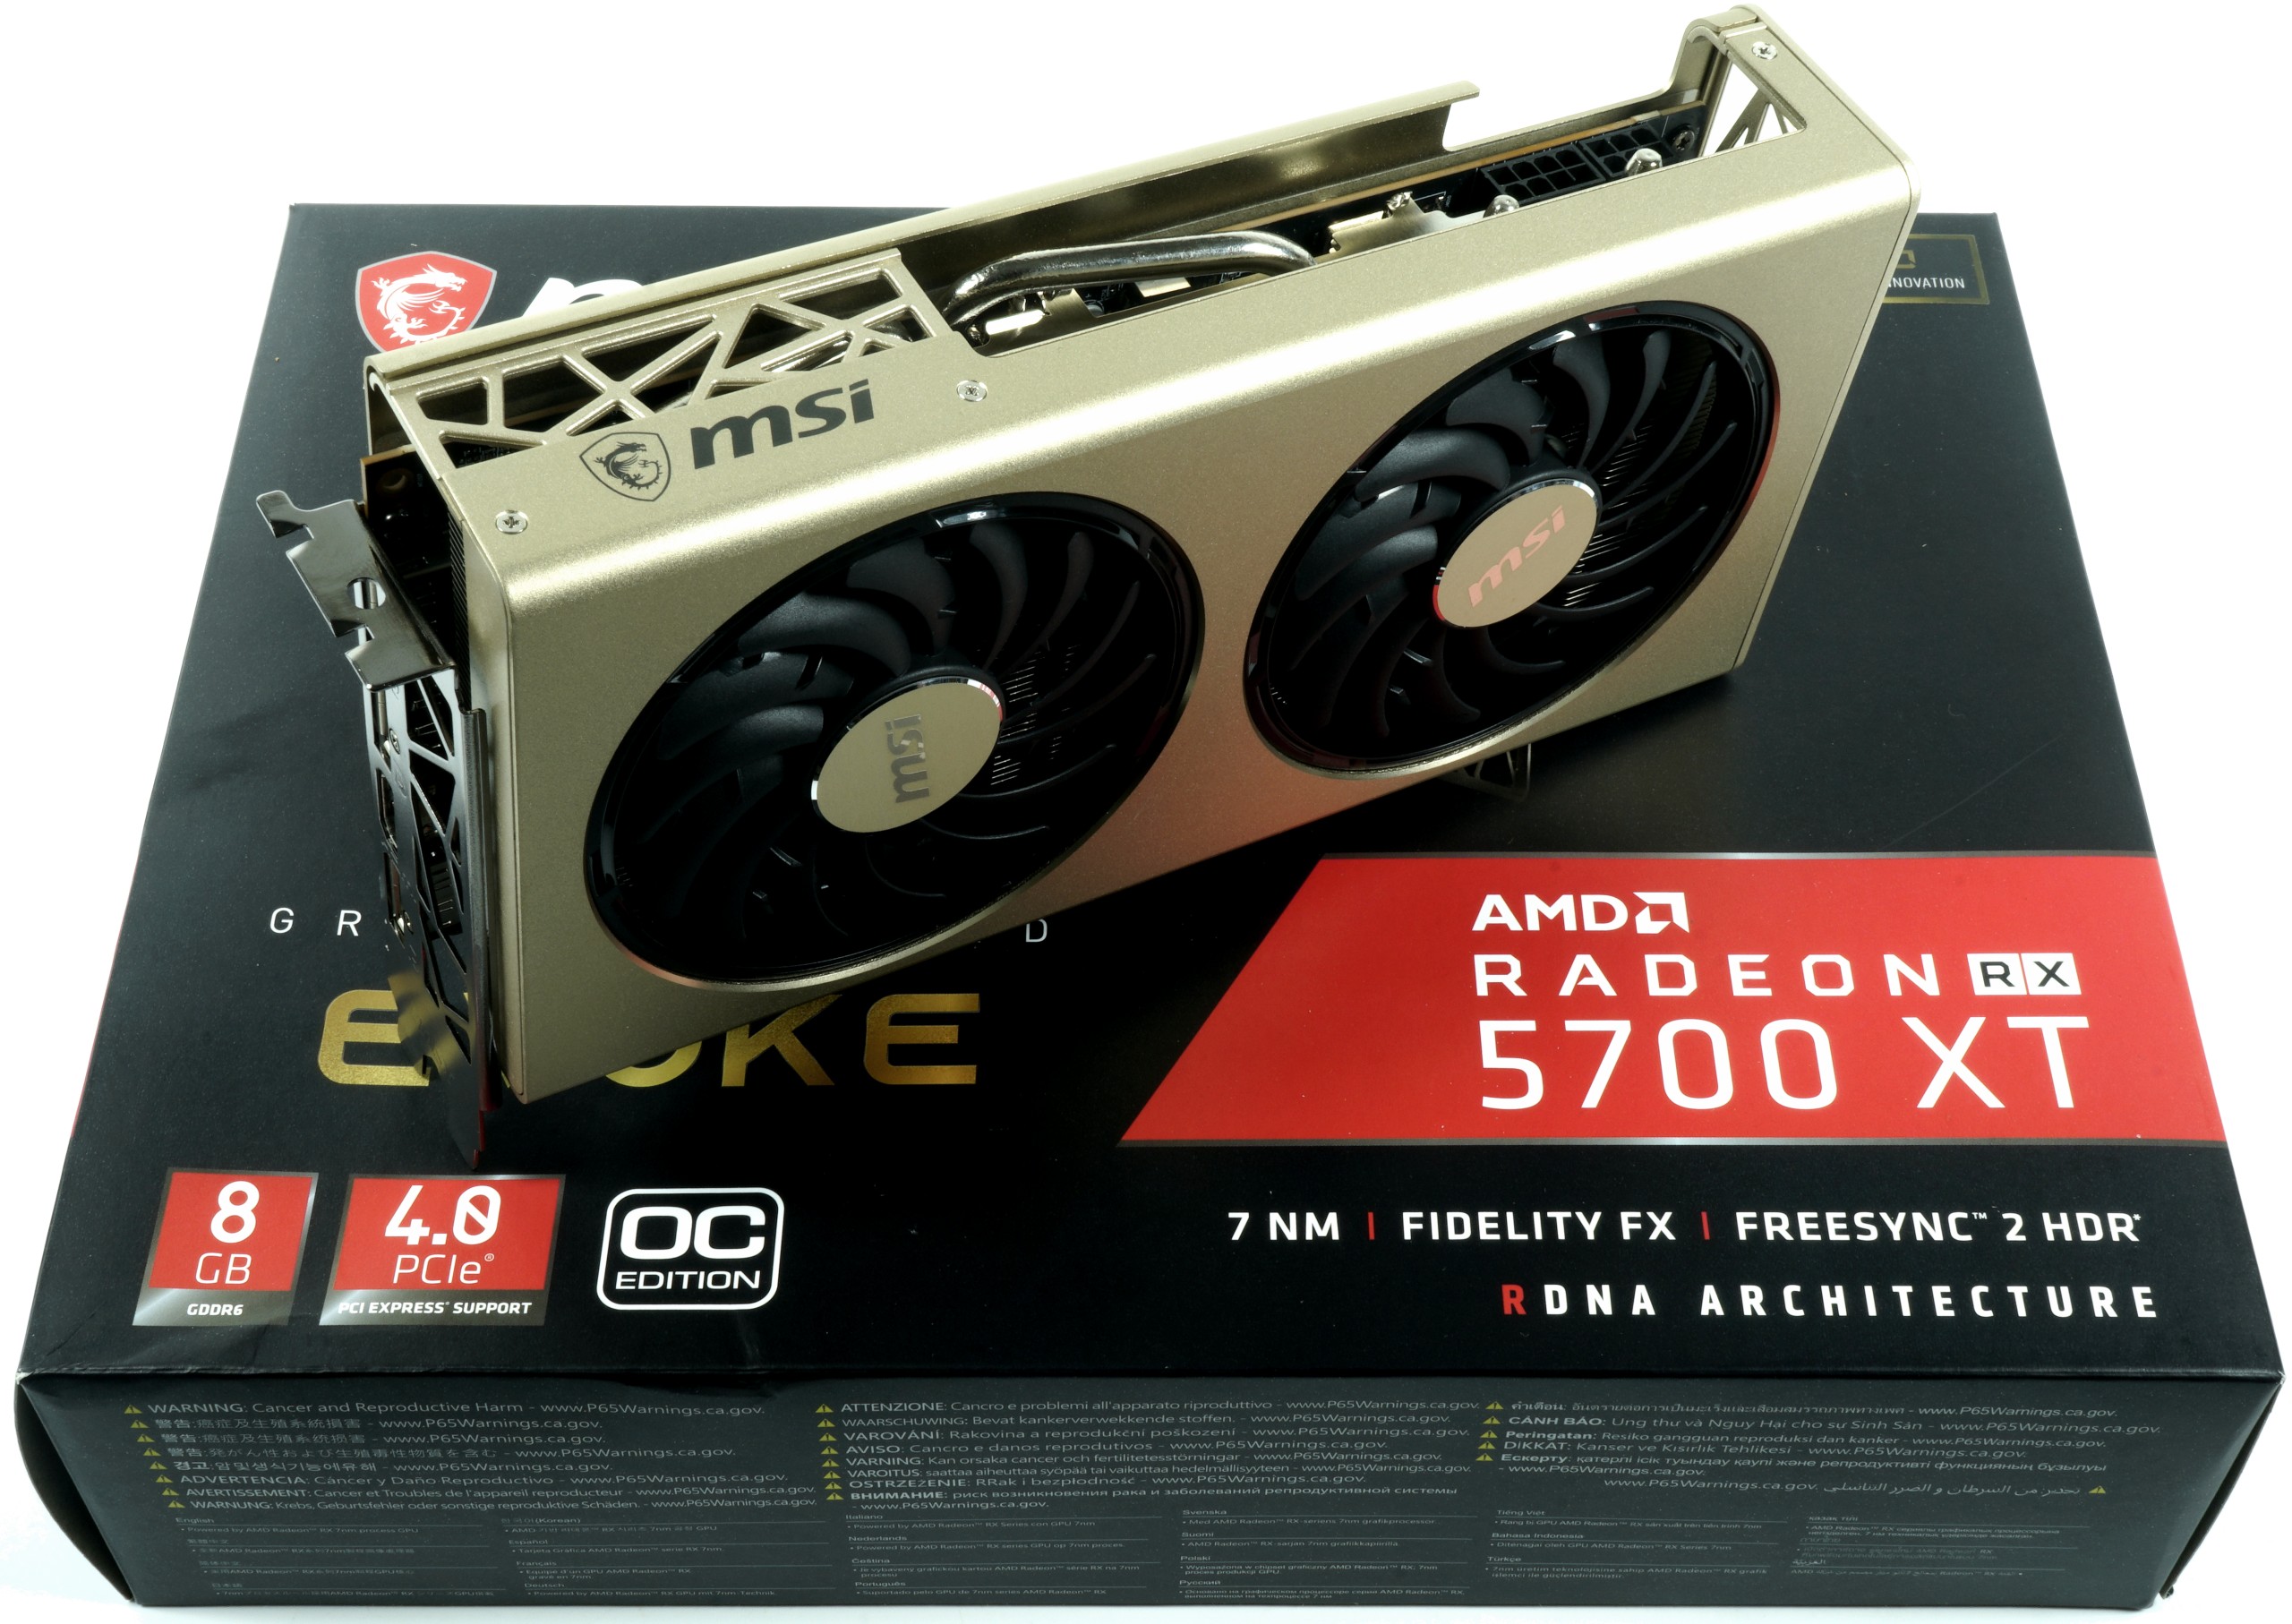 MSI Radeon RX 5700 XT Evoke OC Edition tested - butter or